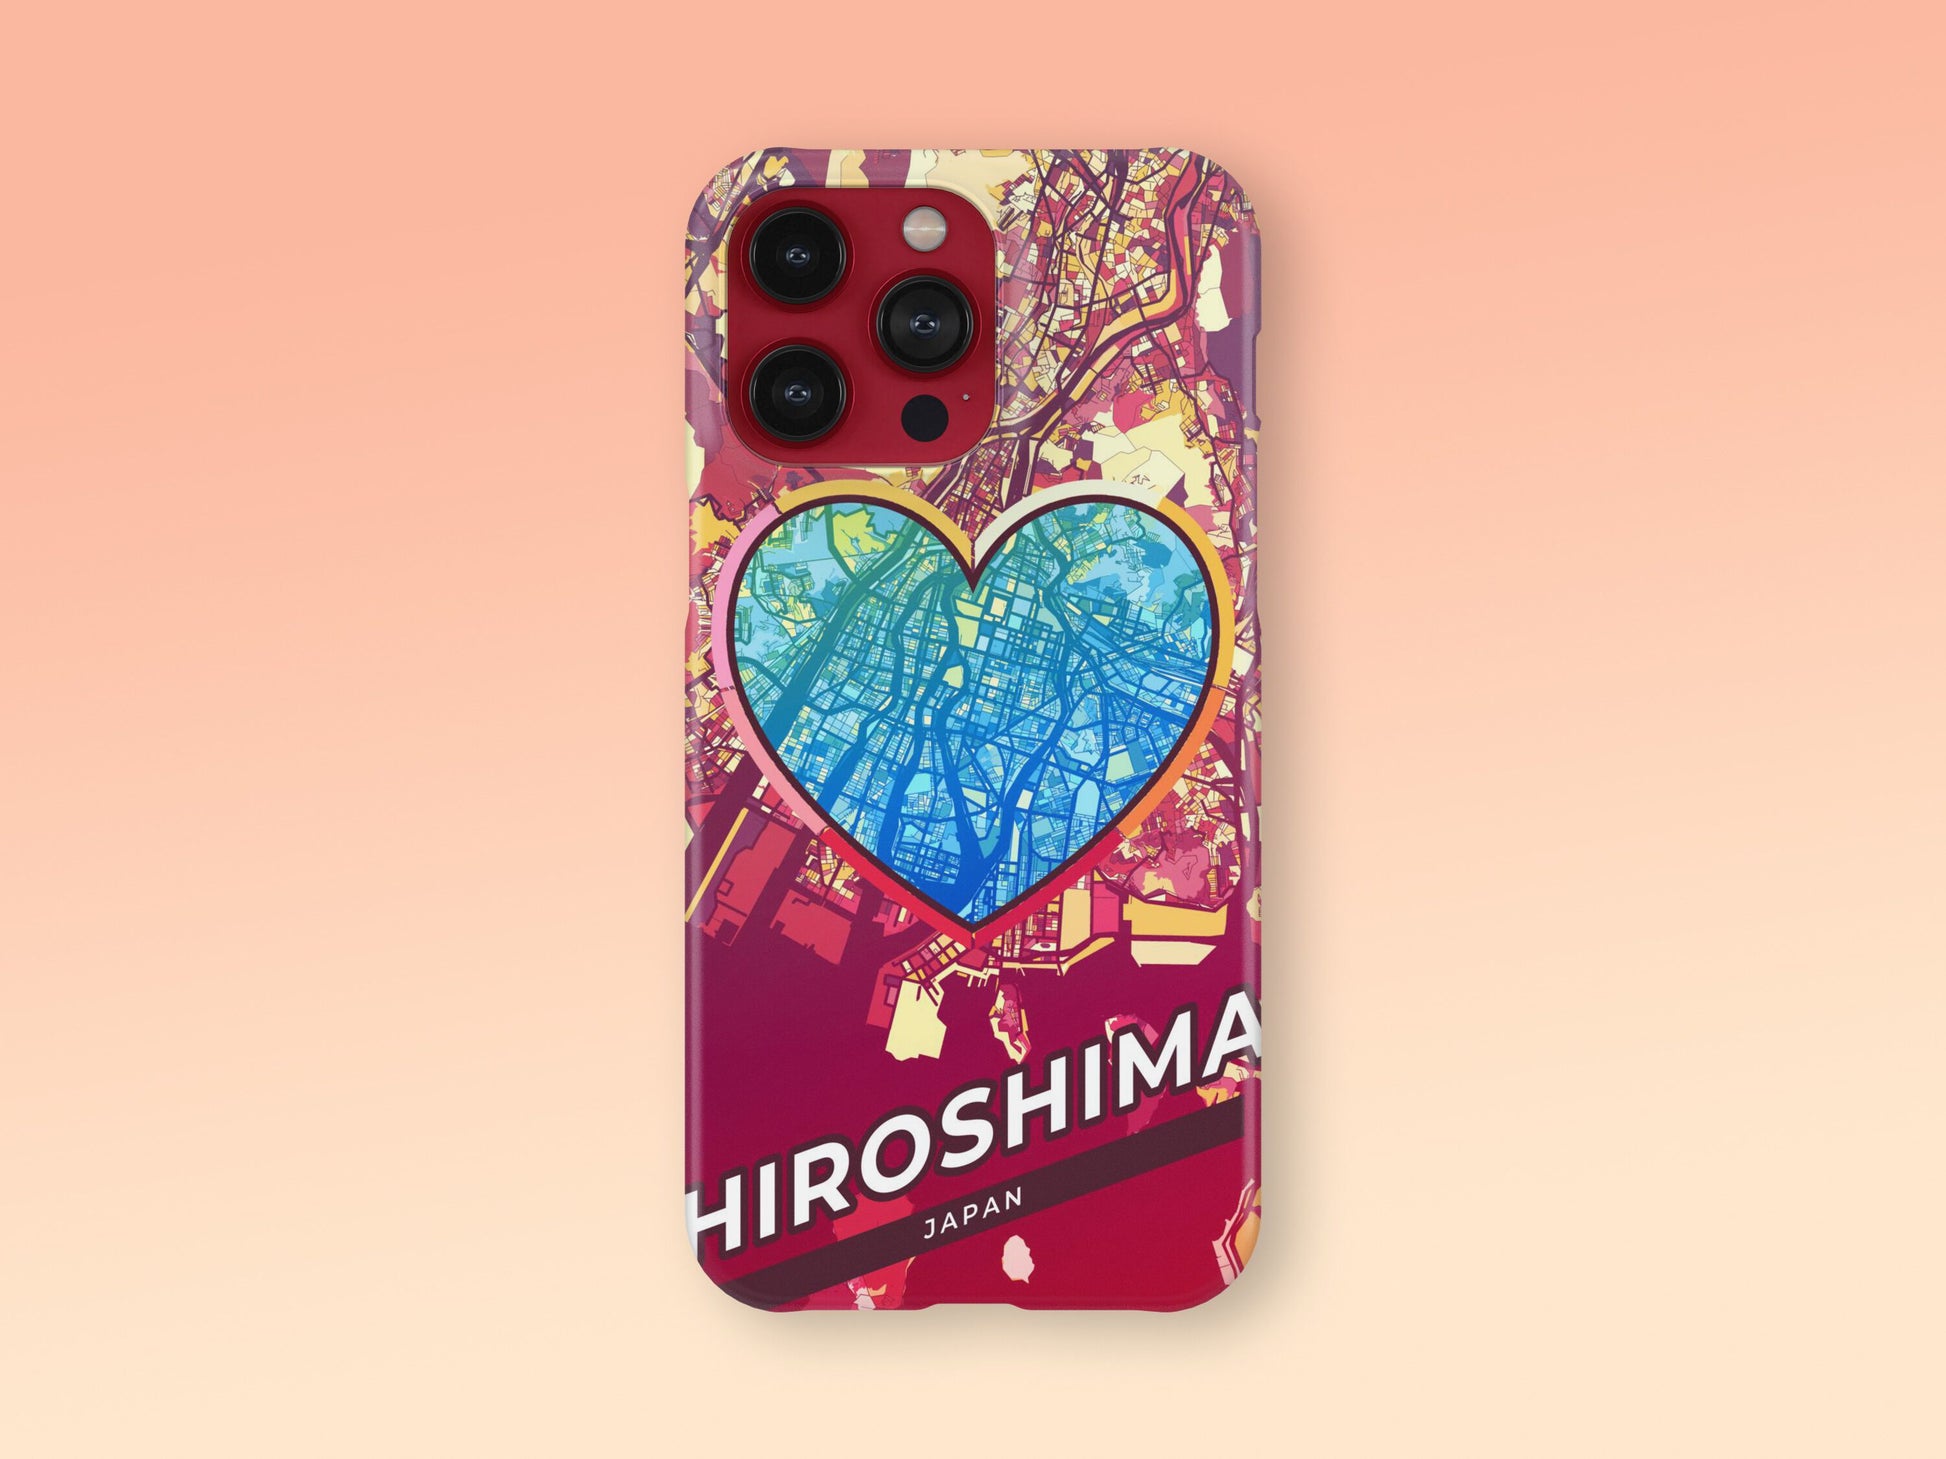 Hiroshima Japan slim phone case with colorful icon. Birthday, wedding or housewarming gift. Couple match cases. 2